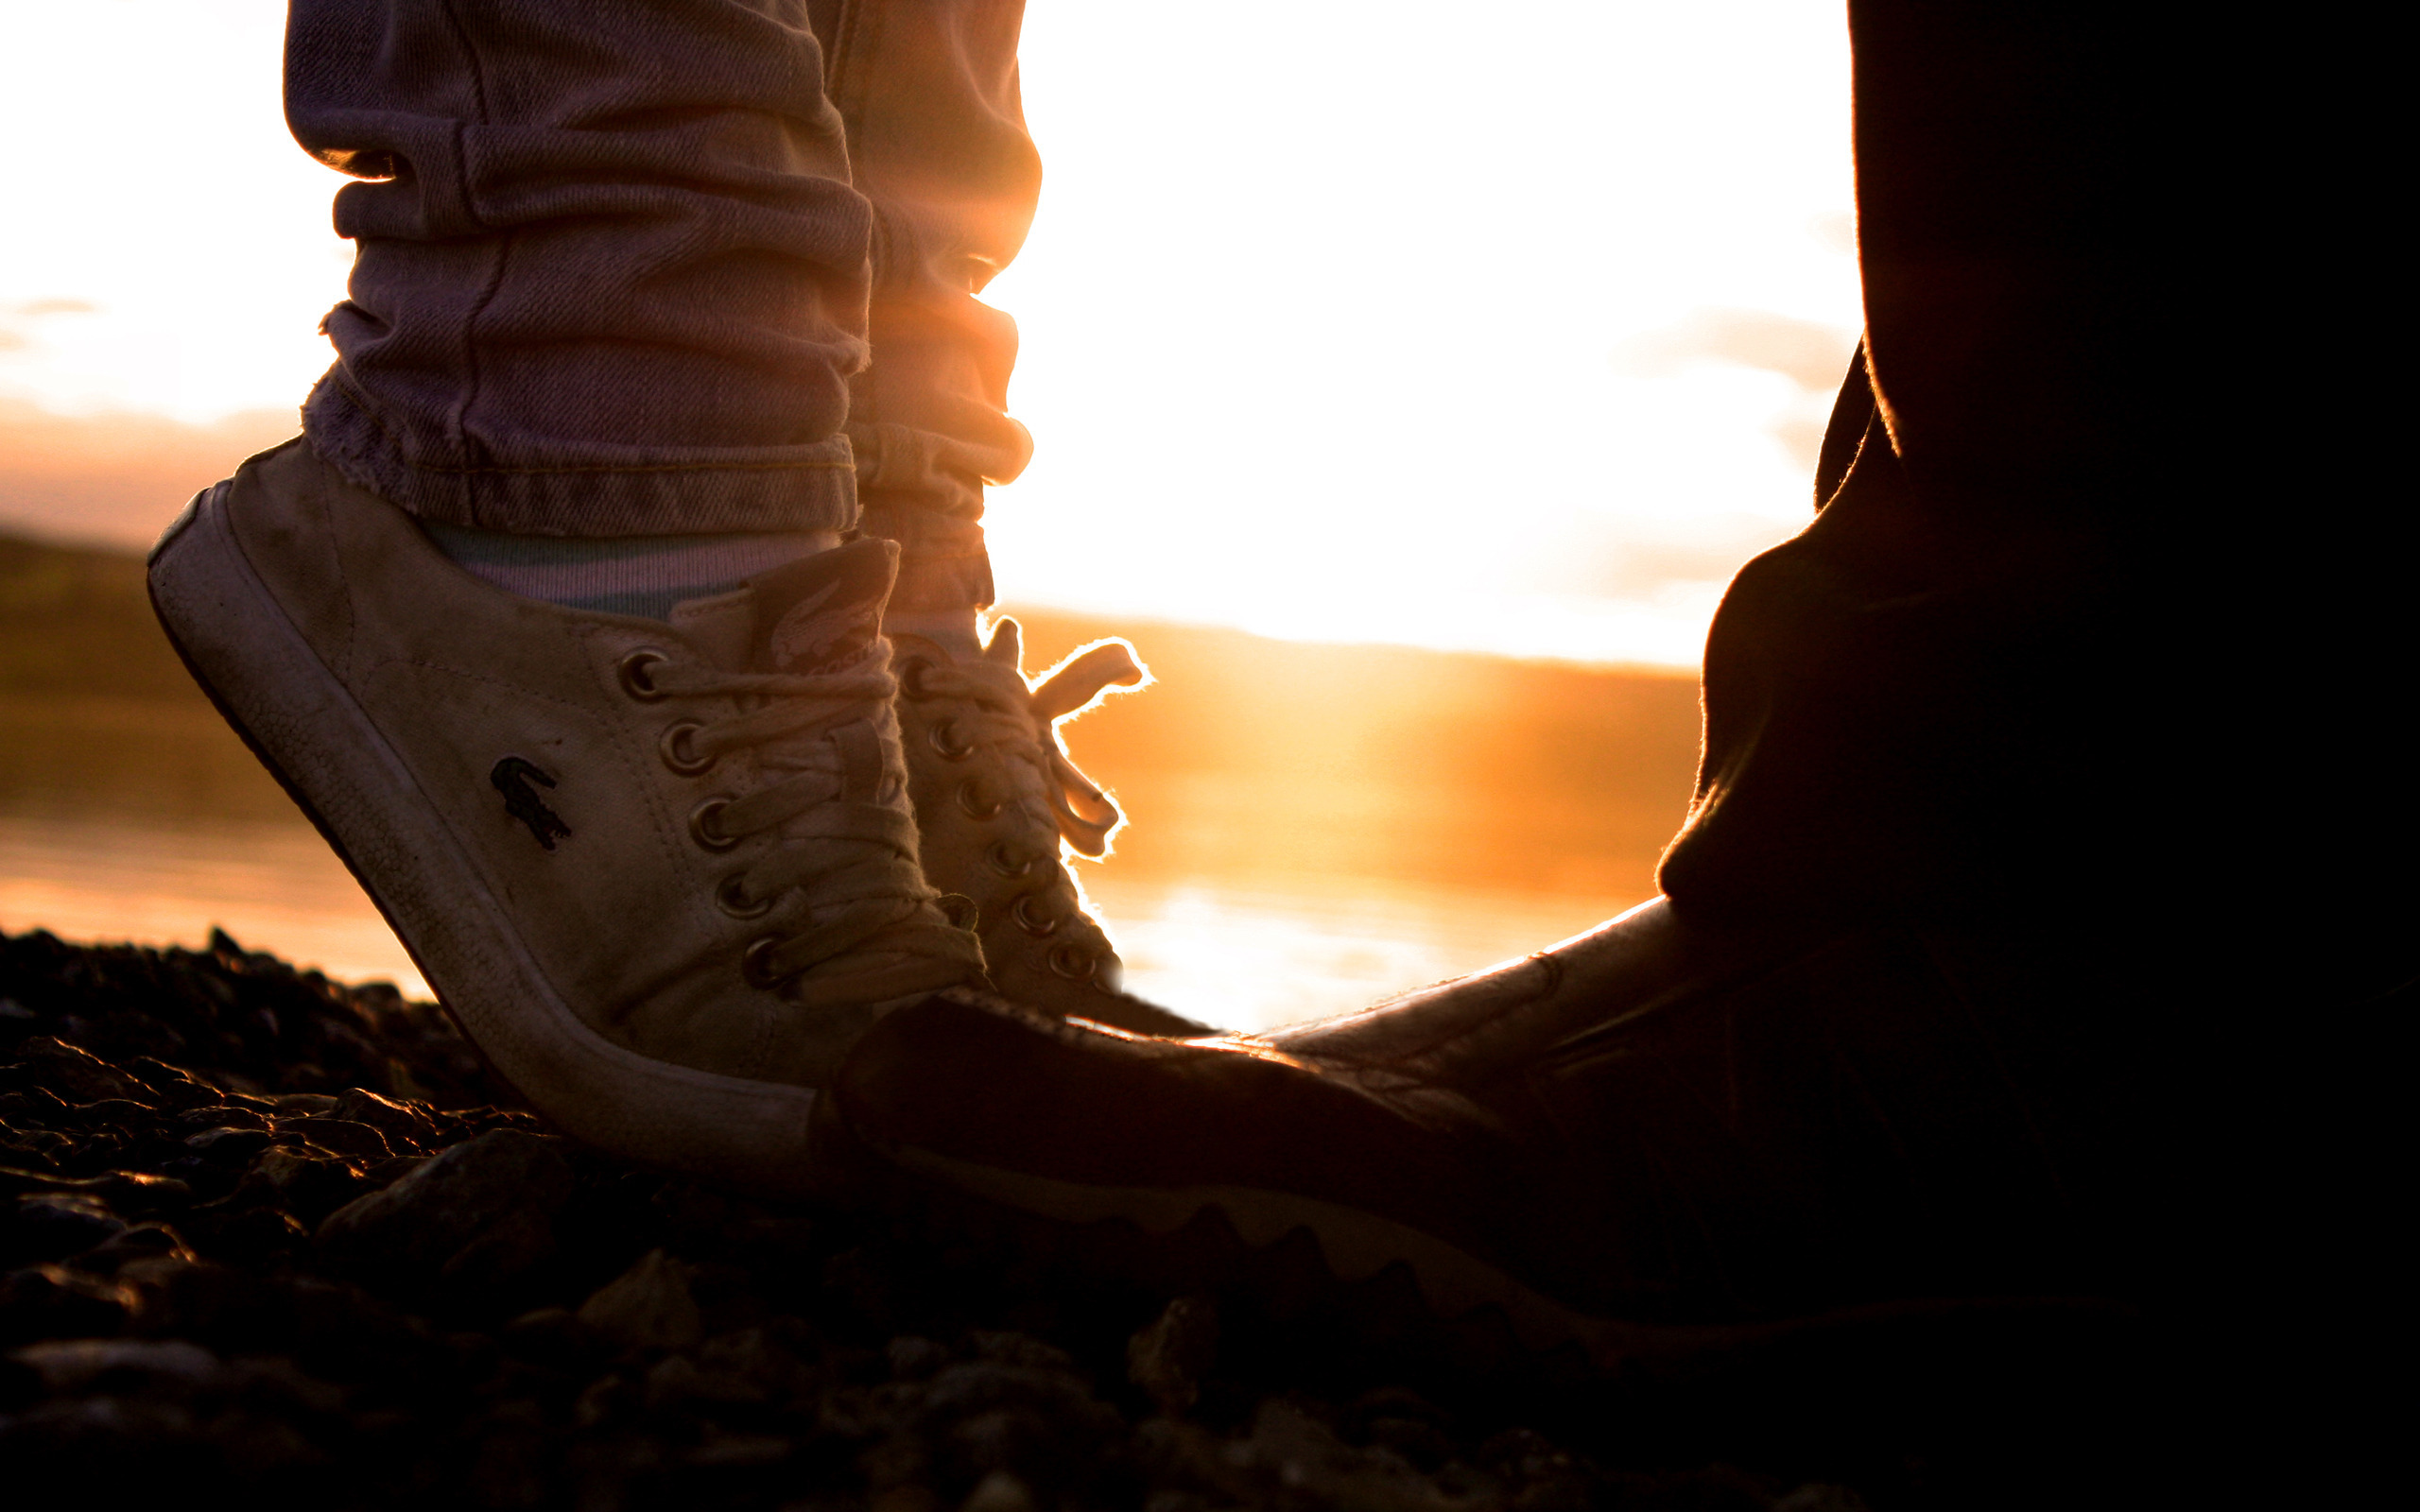 Romantic sunset view with sneakers - Photography love captured in a desktop wallpaper.